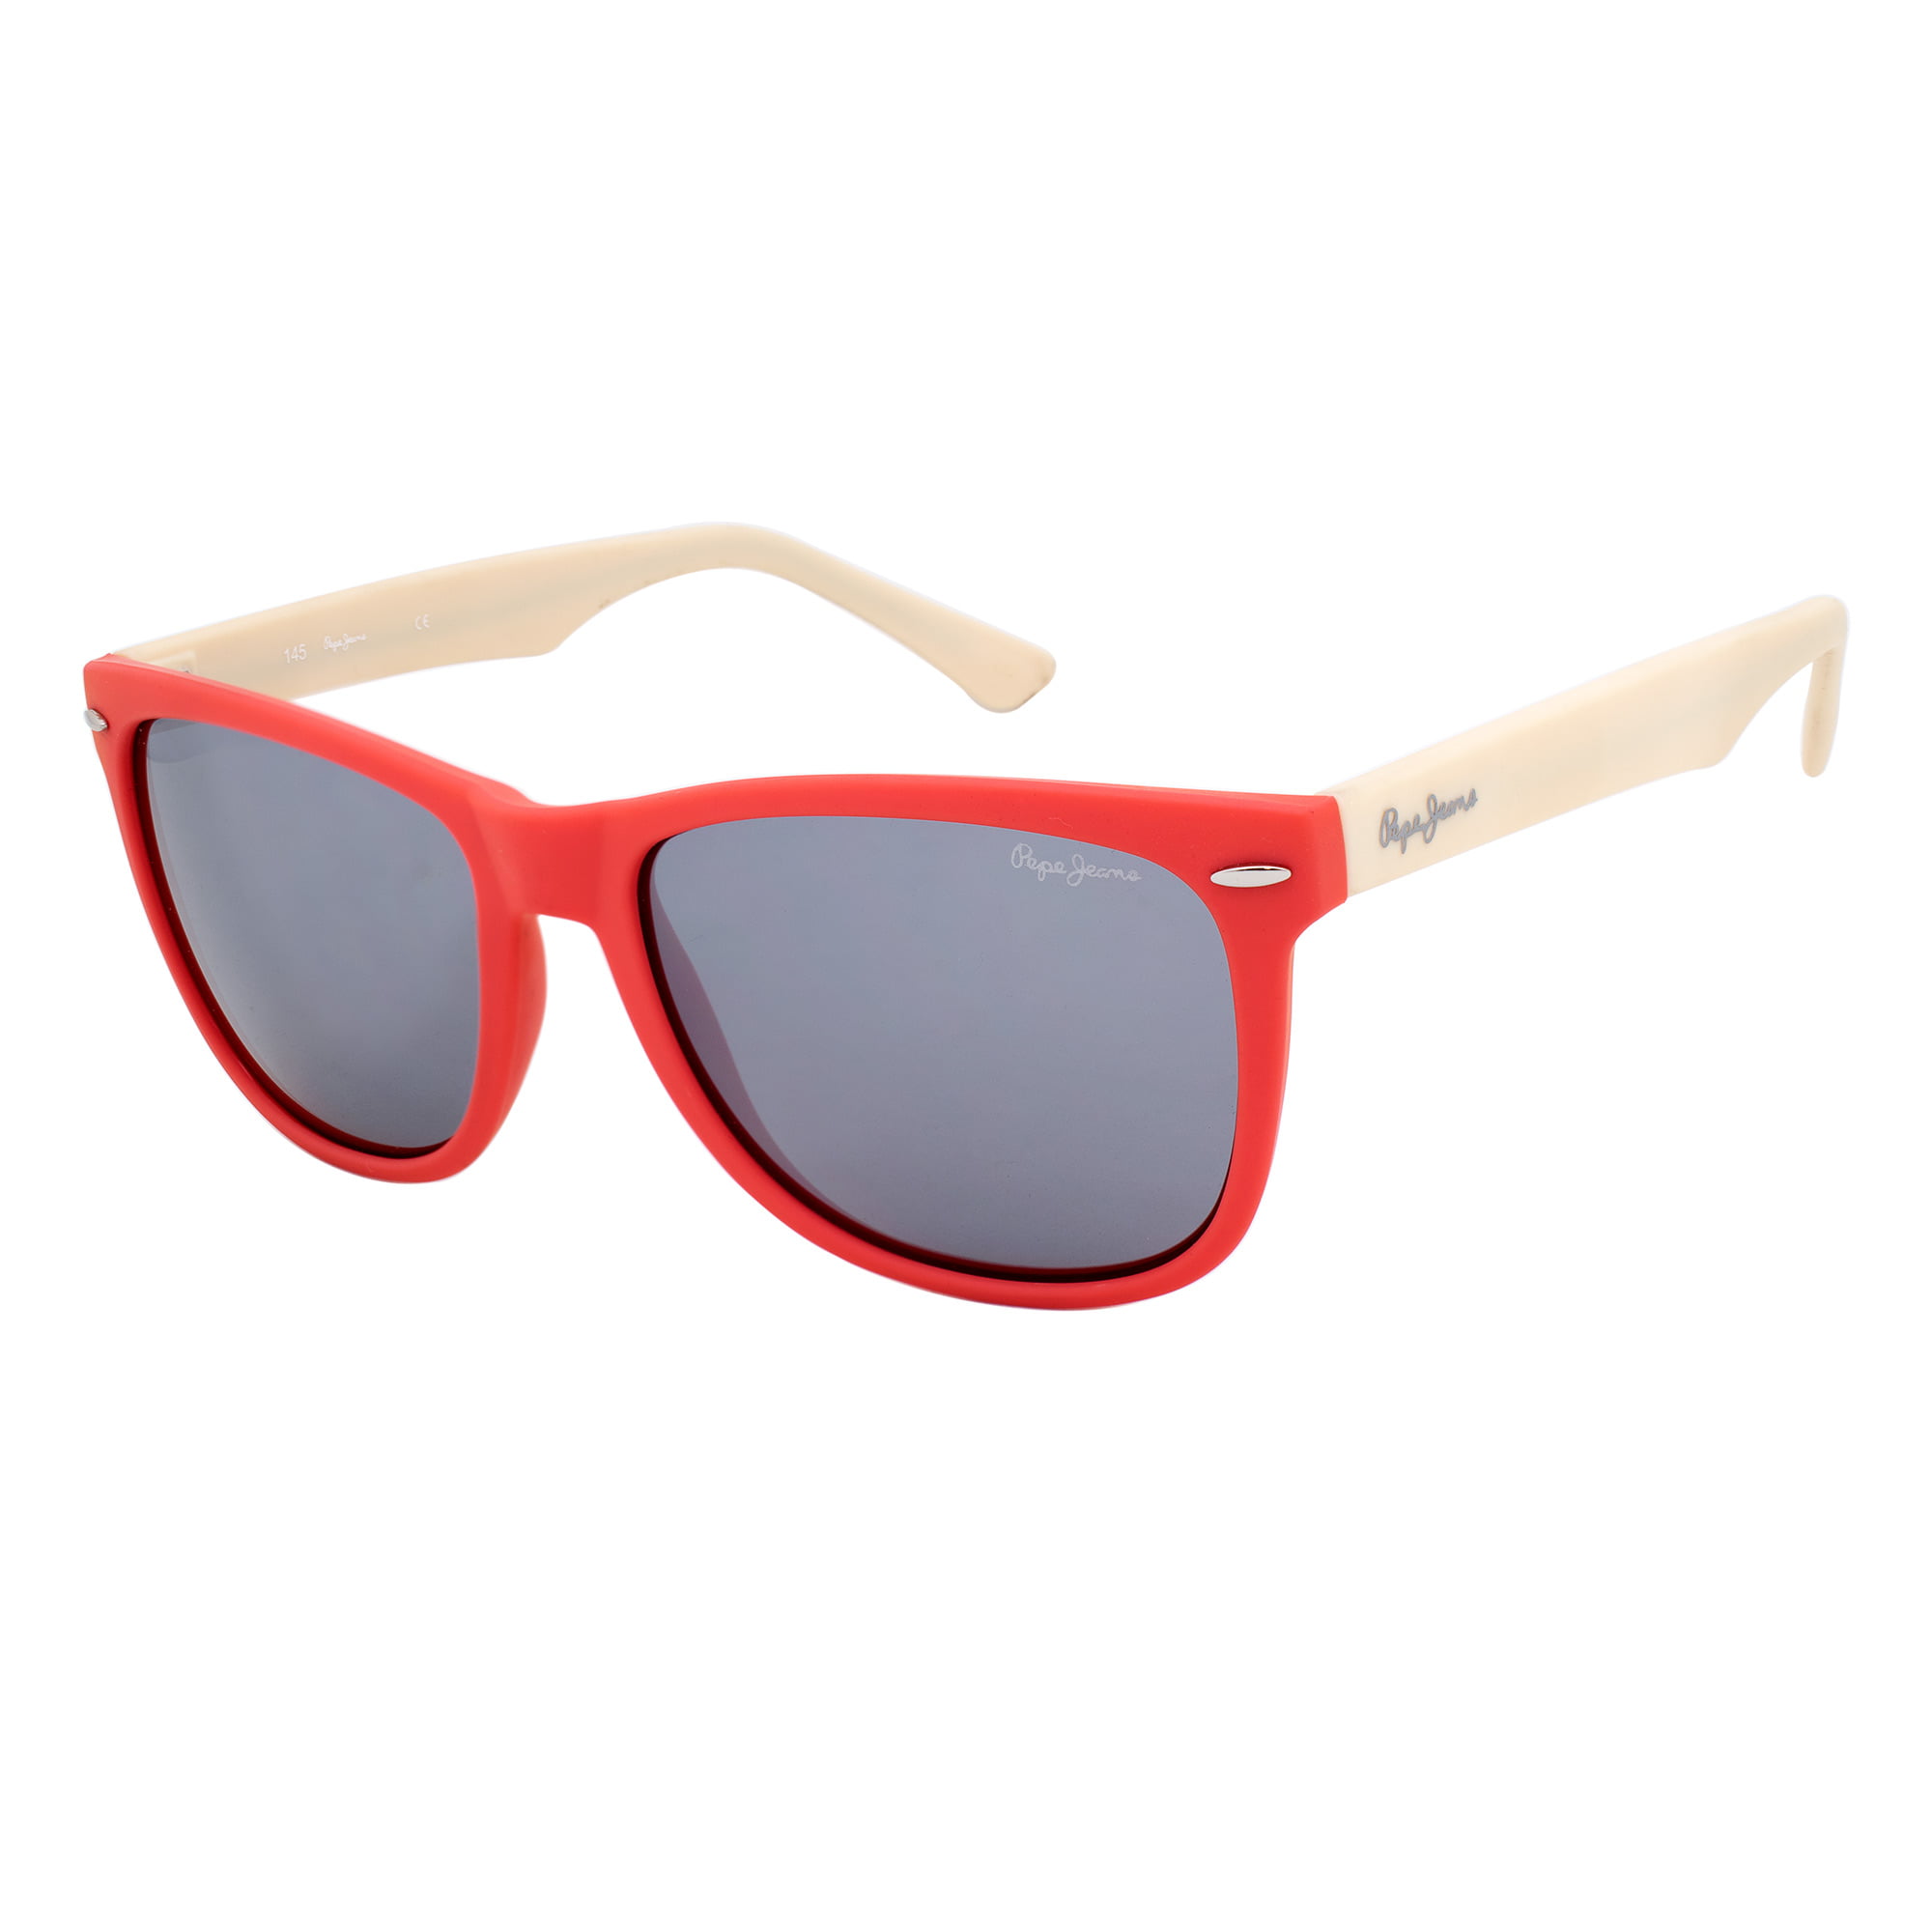 Women Accessories Pepe Jeans Women Sunglasses Pepe Jeans Women Sunglasses Pepe Jeans Women Sunglasses PEPE JEANS red 